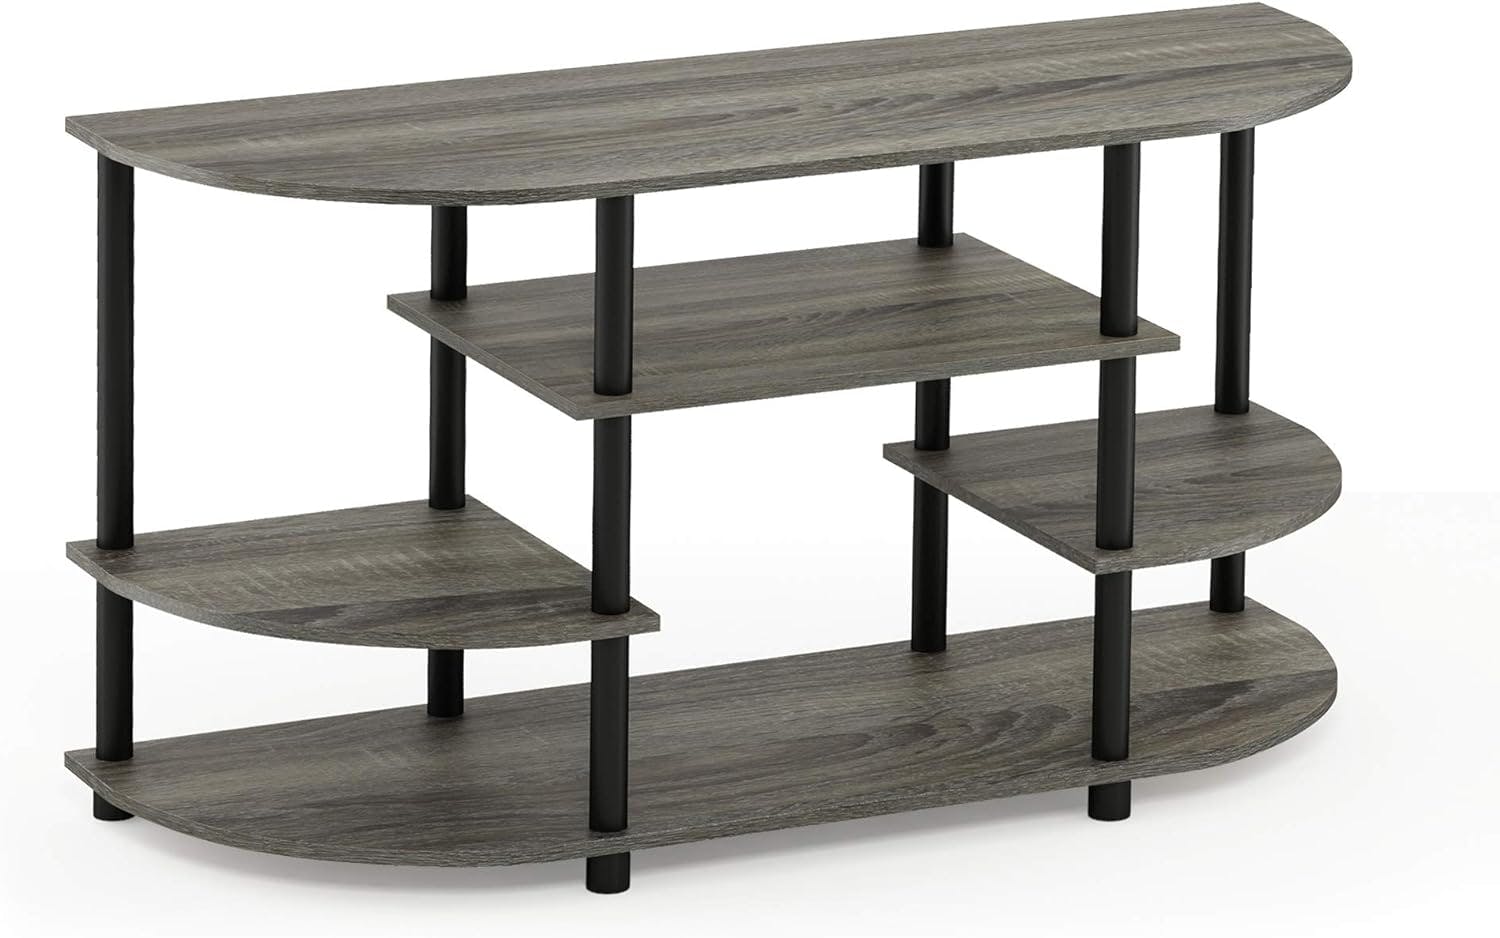 French Oak Grey/Black Wood Corner TV Stand with Open Shelves